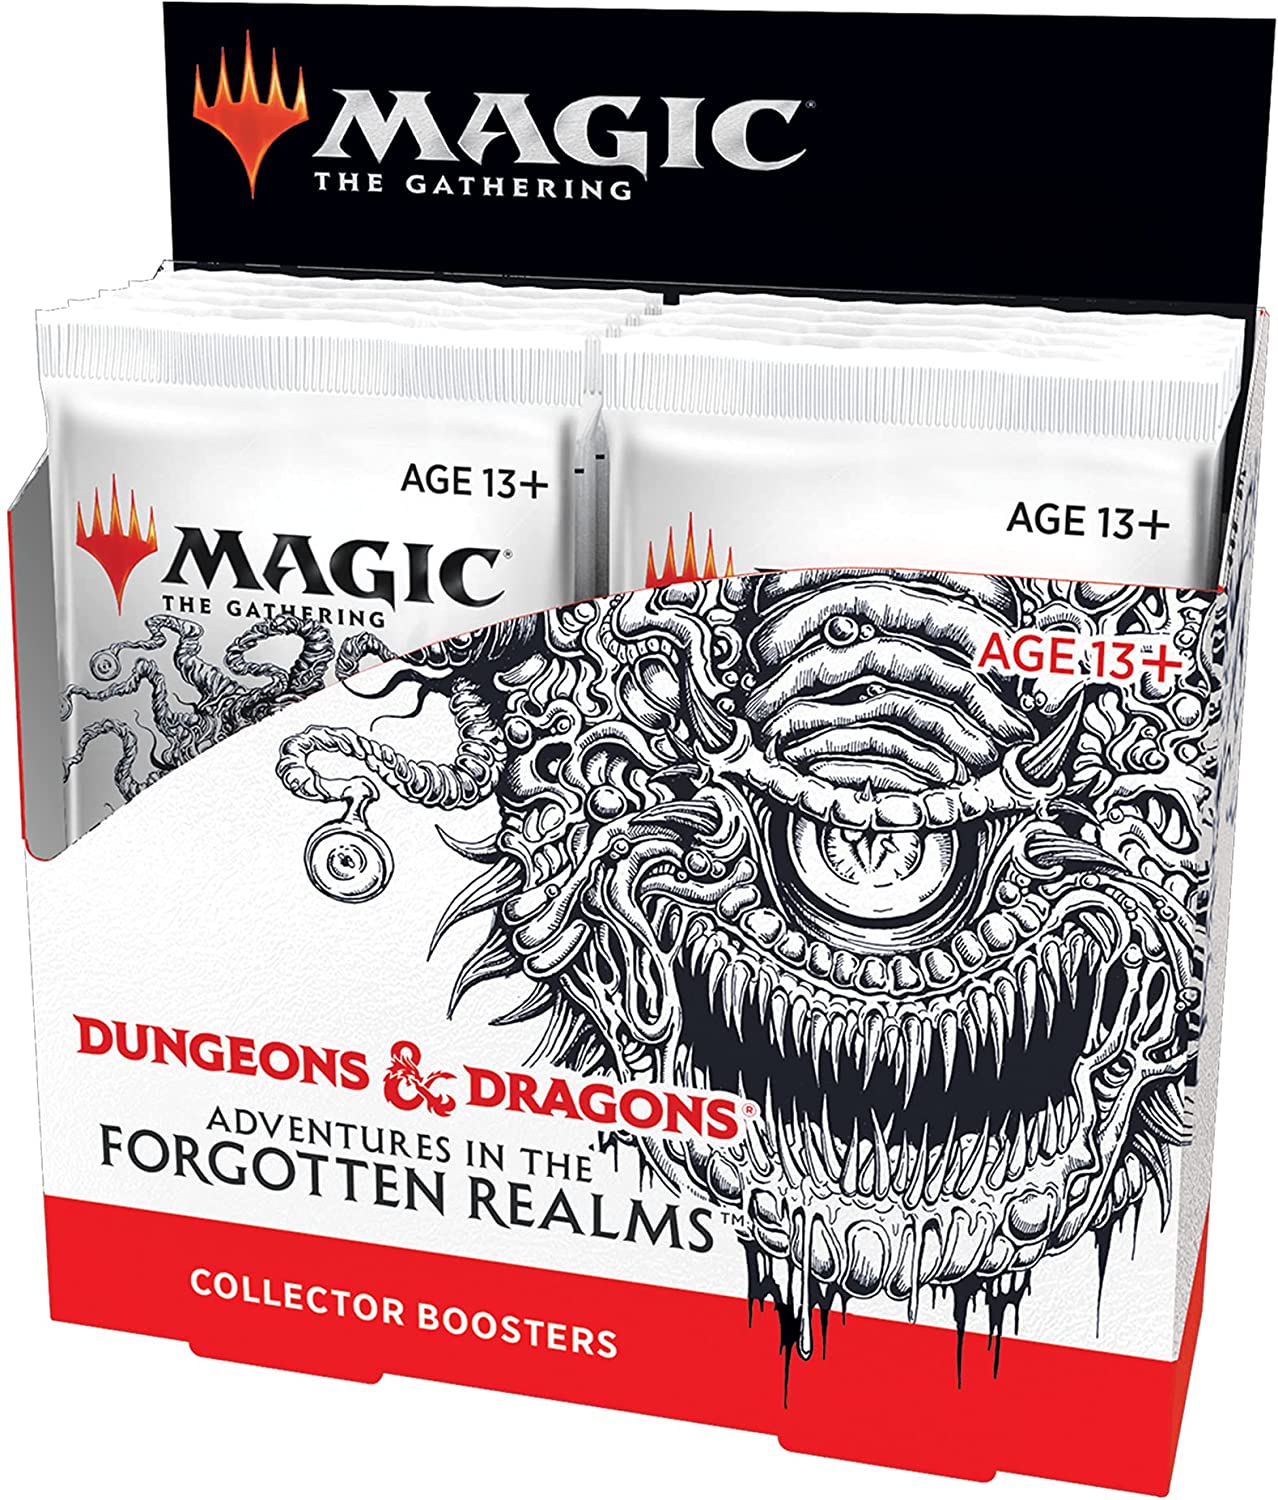 Magic the Gathering: Adventures in the Forgotten Realms (Dungeons & Dragons) Collector Booster Packs & Boxes